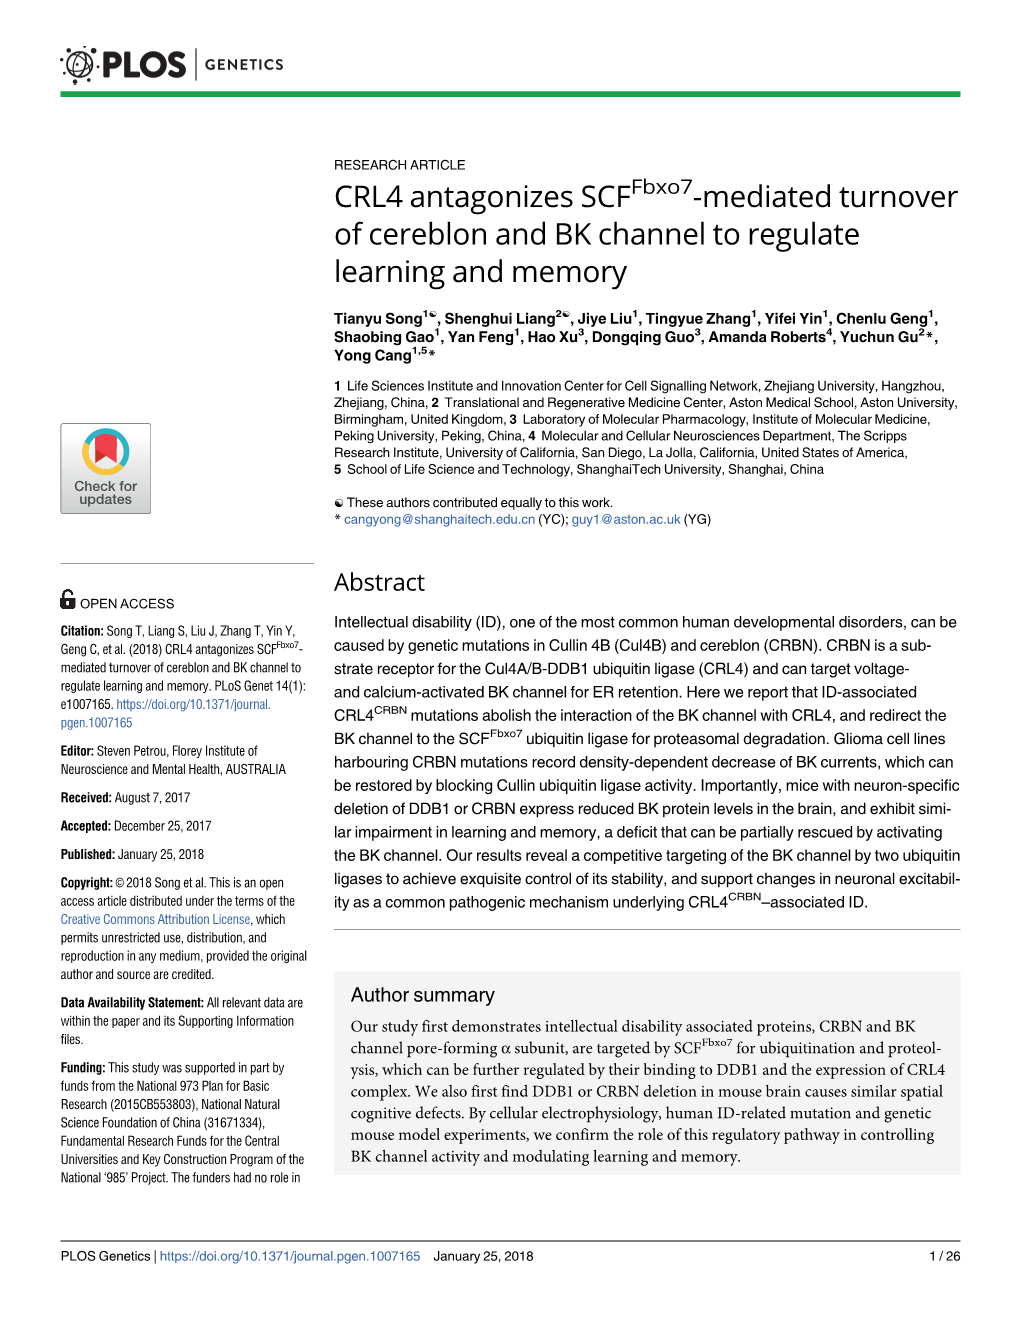 CRL4 Antagonizes Scffbxo7-Mediated Turnover of Cereblon and BK Channel to Regulate Learning and Memory